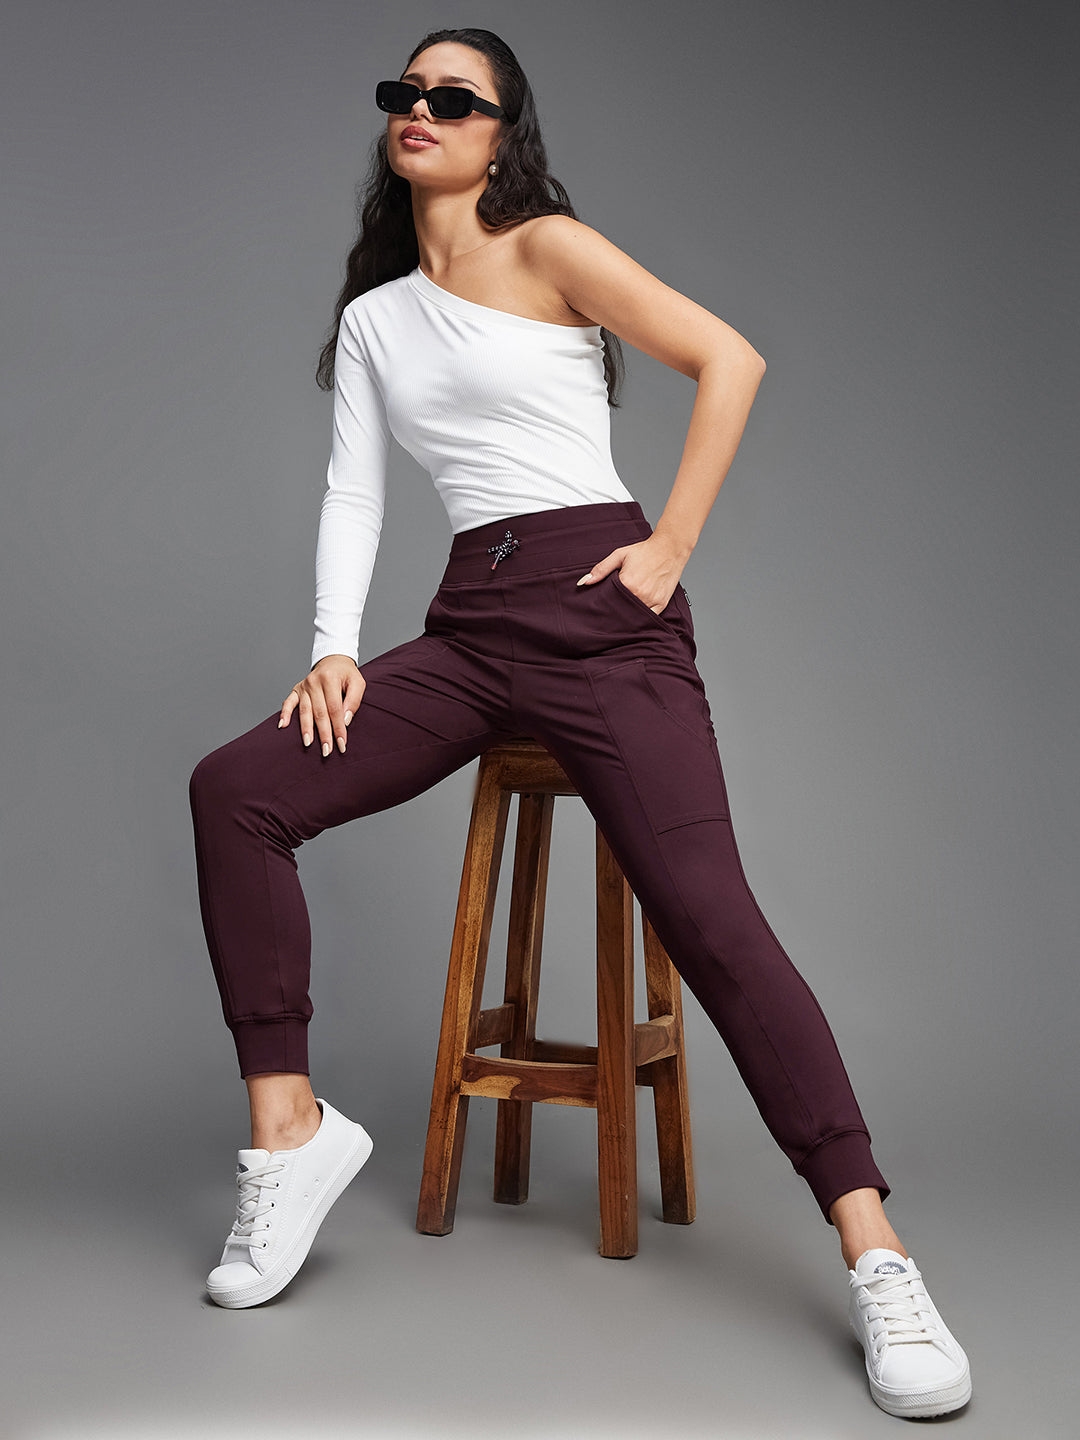 MISS CHASE | Solid Wine Relaxed Fit Regular-Length Tiggers